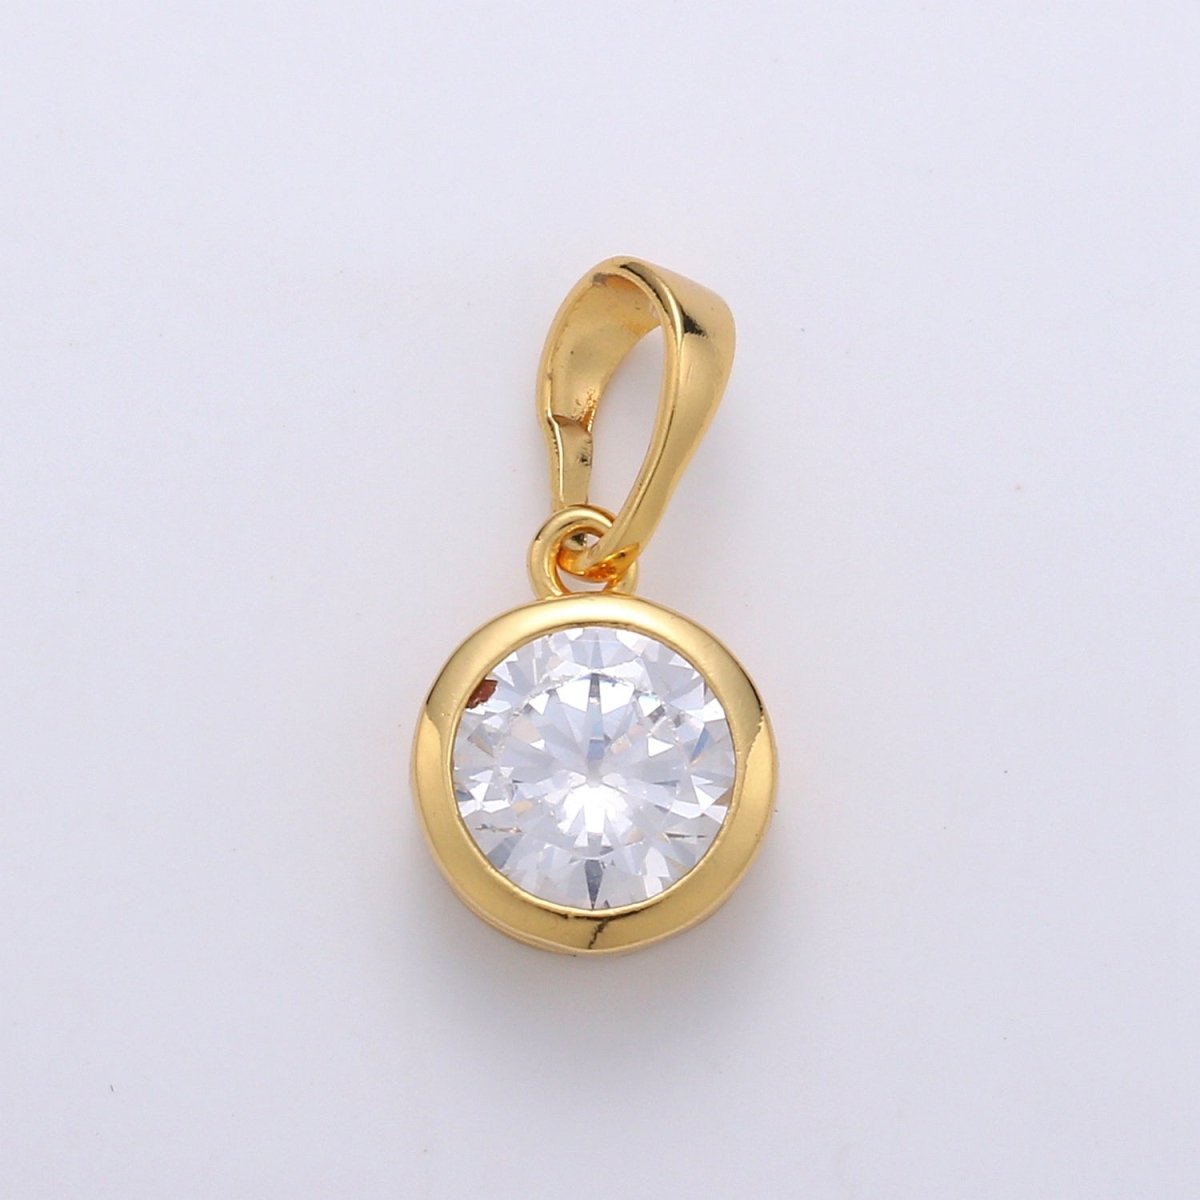 Solitaire Round Cubic Zirconia in Bezel Charm Pendant, 24K Gold Filled Charm for Dangle Necklace Bracelet Earring Supply J-076 - DLUXCA